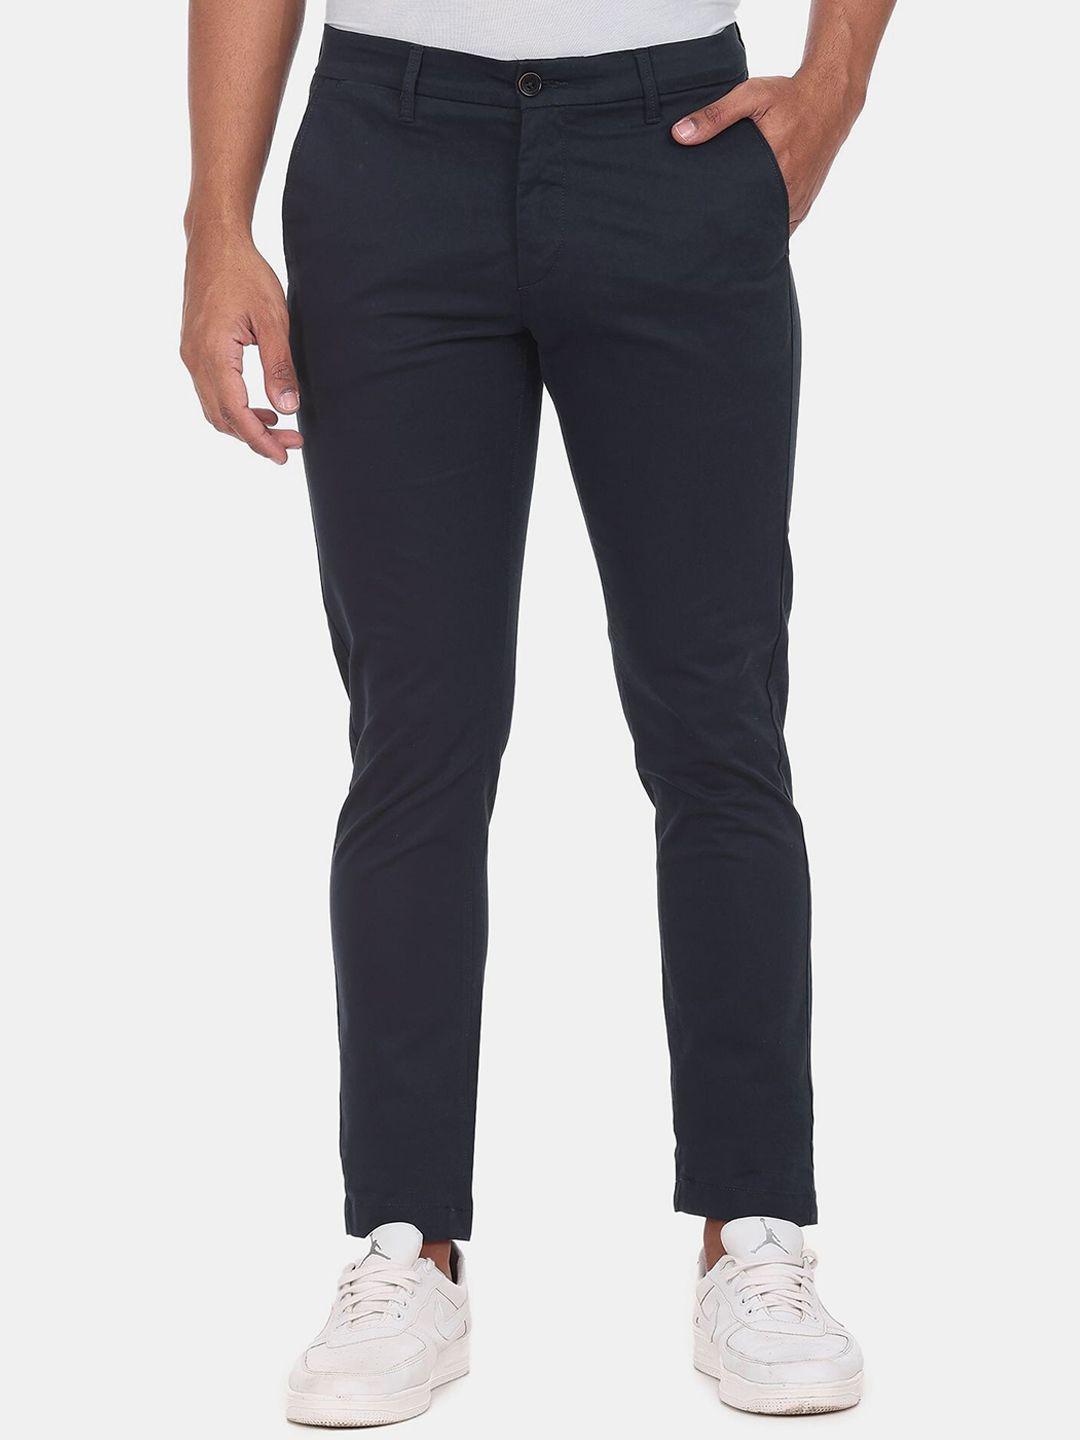 u s polo assn men navy blue solid trousers